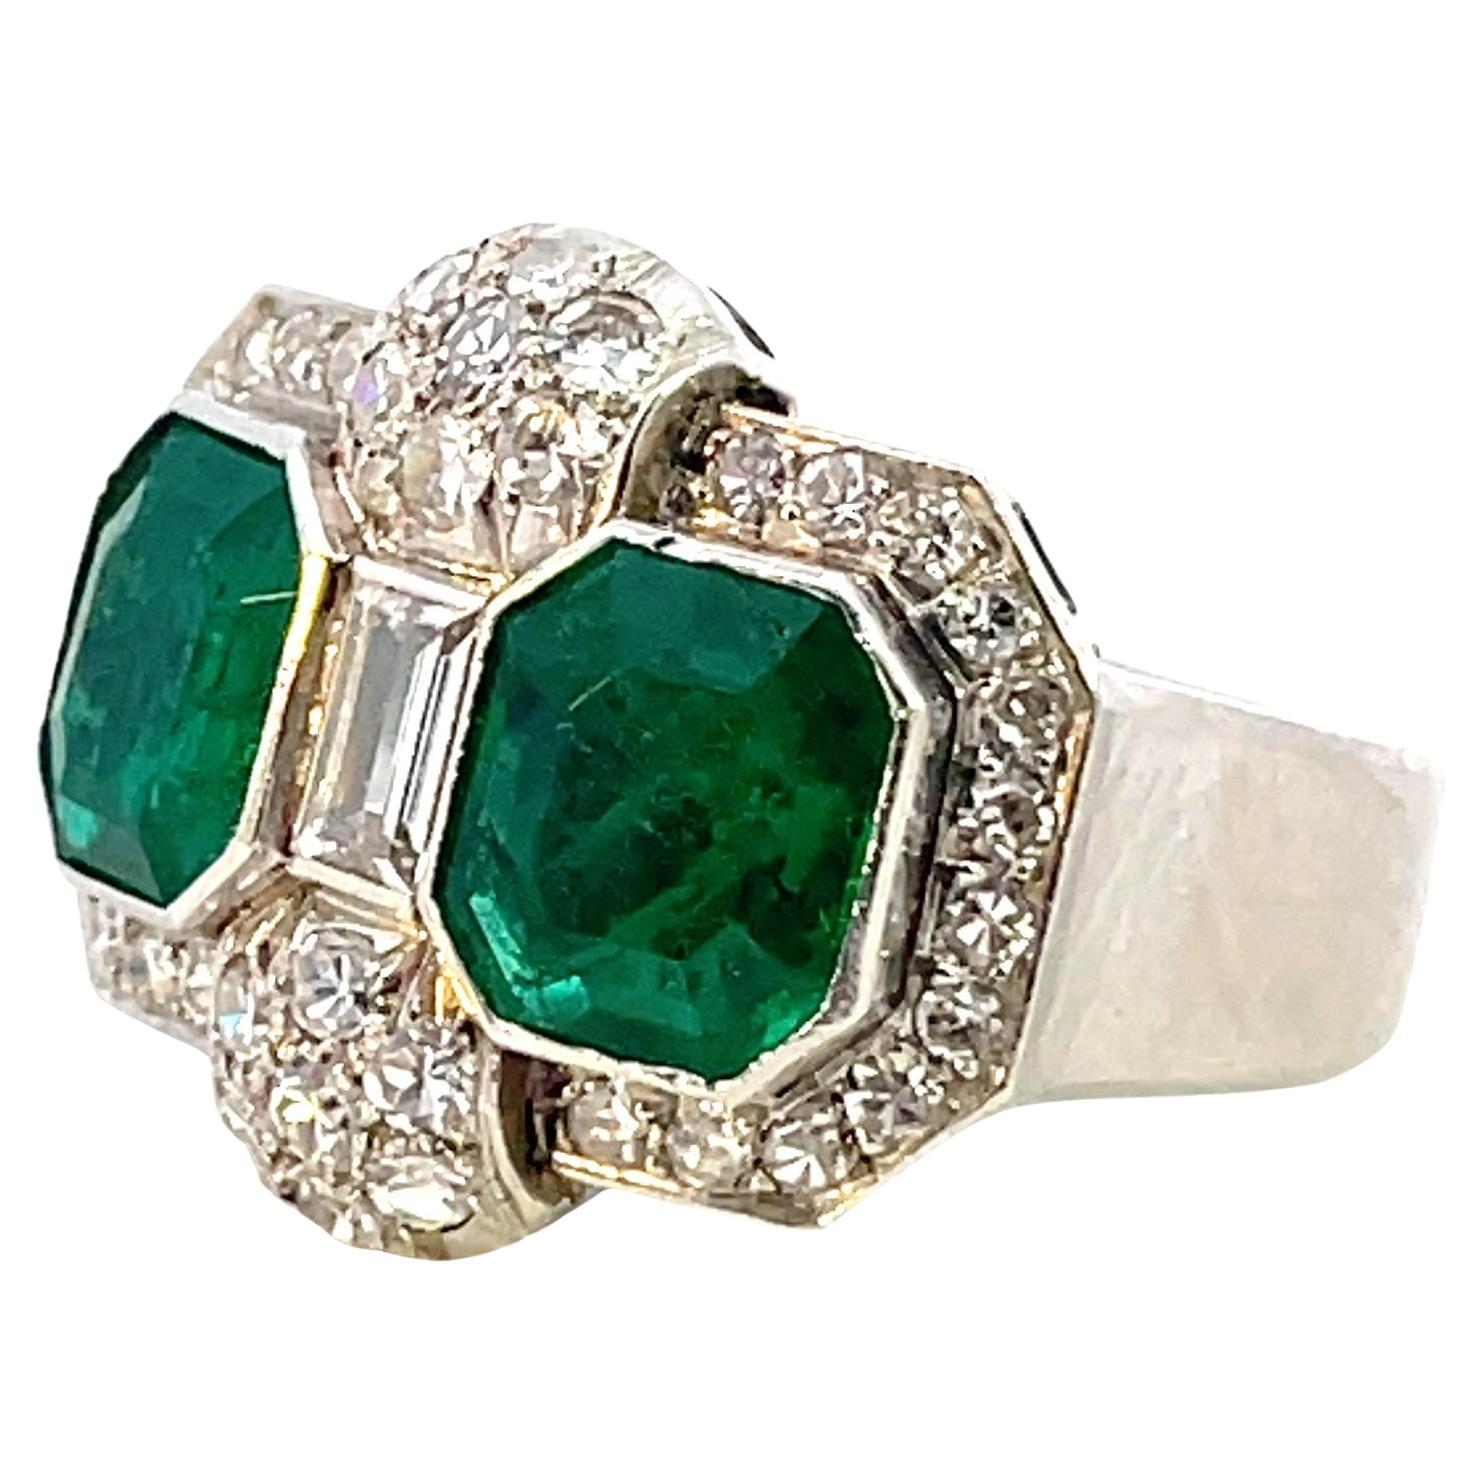 Stunning Art Deco Platinum Ring featuring exquisite Colombian Emeralds

Design: Timeless Art Deco elegance
Gems: 2 vivid green emeralds, each weighing approximately 1.60 carats
Certification: Comes with a GRS Gemological Certificate (GRS2024-047503)